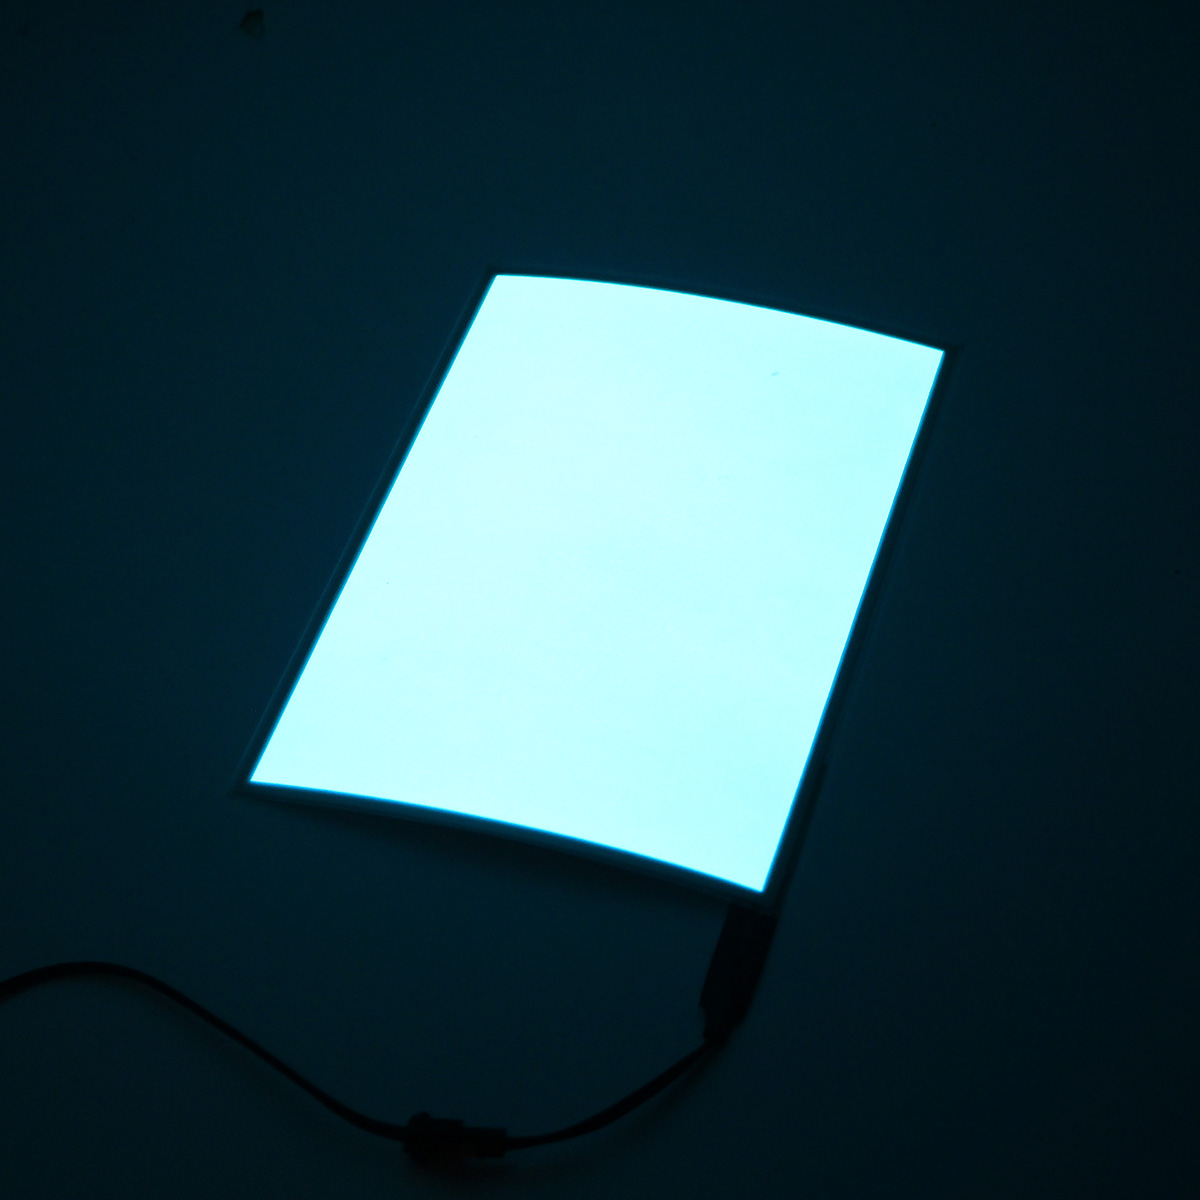 12V-A5-EL-Panel-Electroluminescent-Cuttable-Light-With-Inverter-Paper-Neon-Sheet-1112330